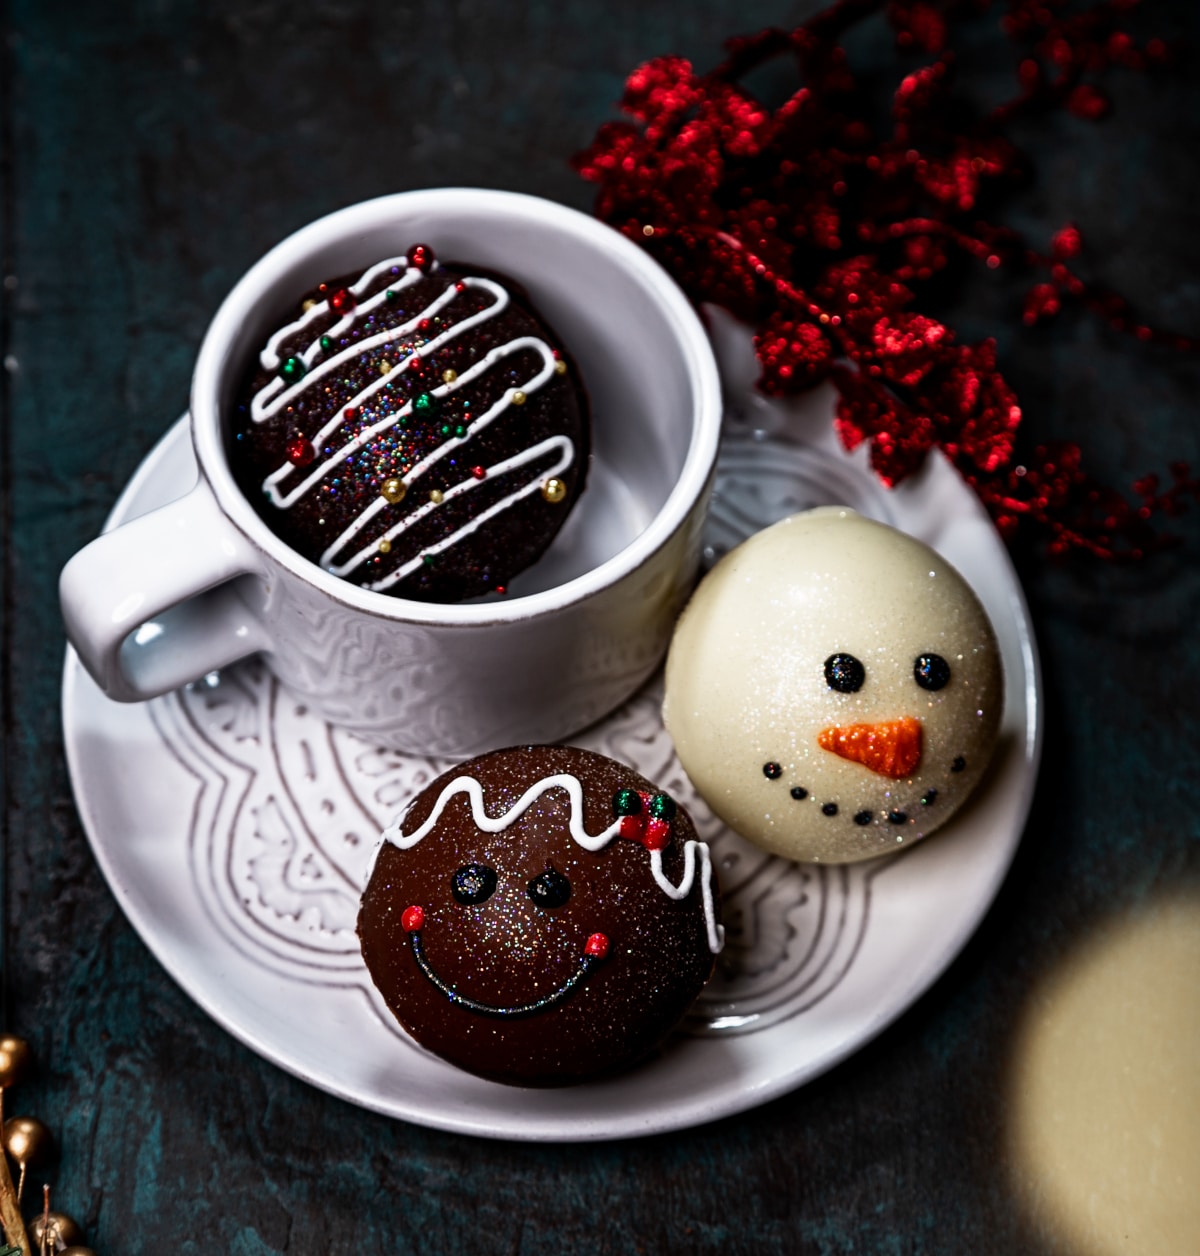 Decorated Hot Chocolate Bomb with 1 hot chocolate bomb in mug. 2 chocolate bombs with cute snowman faces.